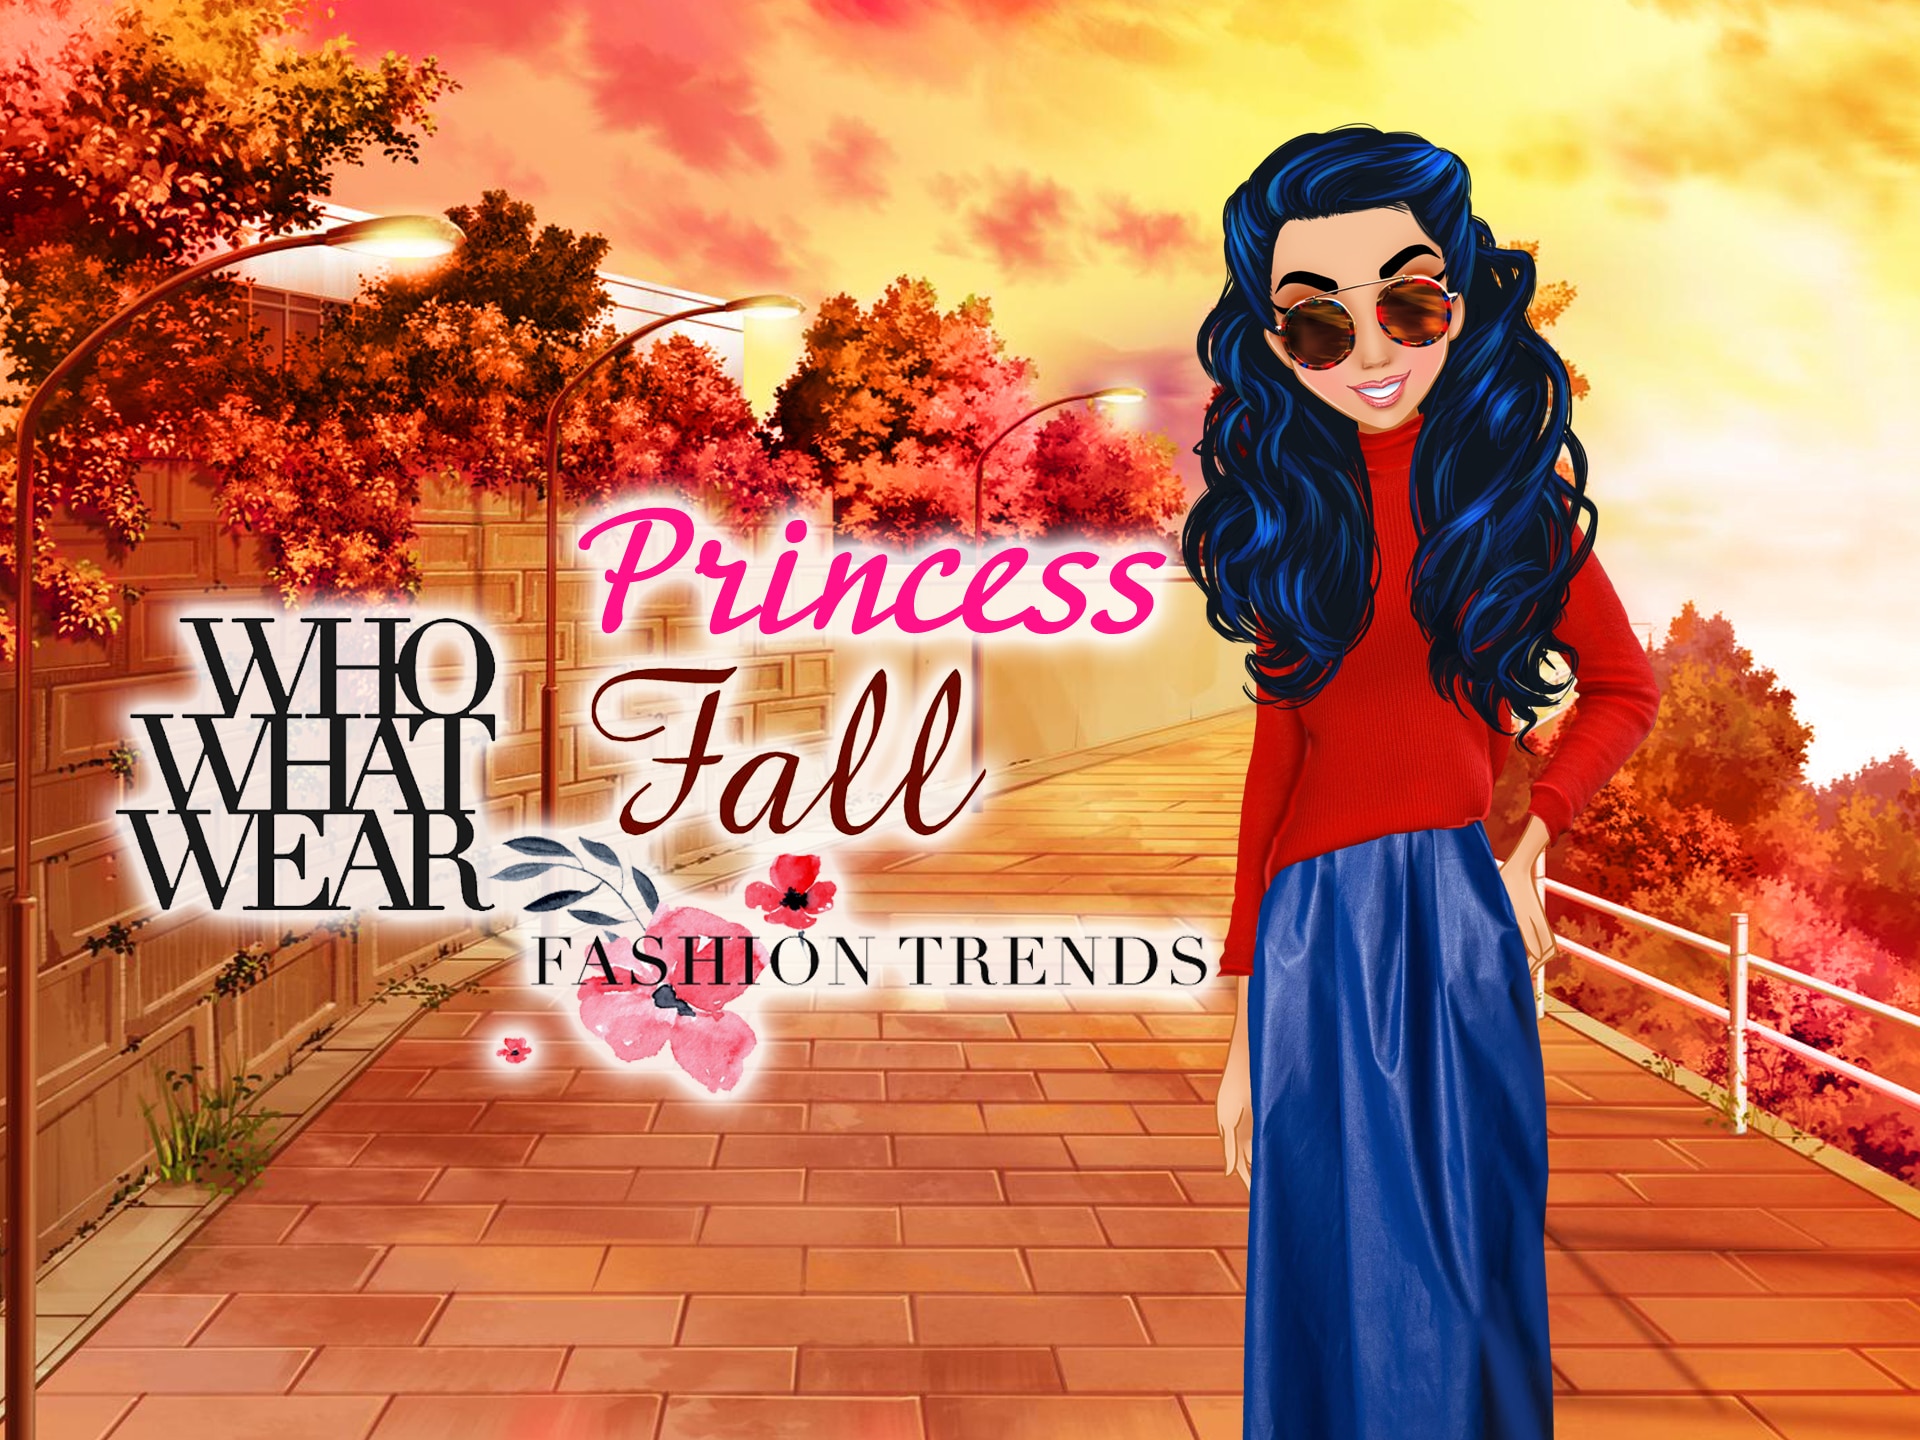 Who What Wear – Princess Fall Fashion Trends